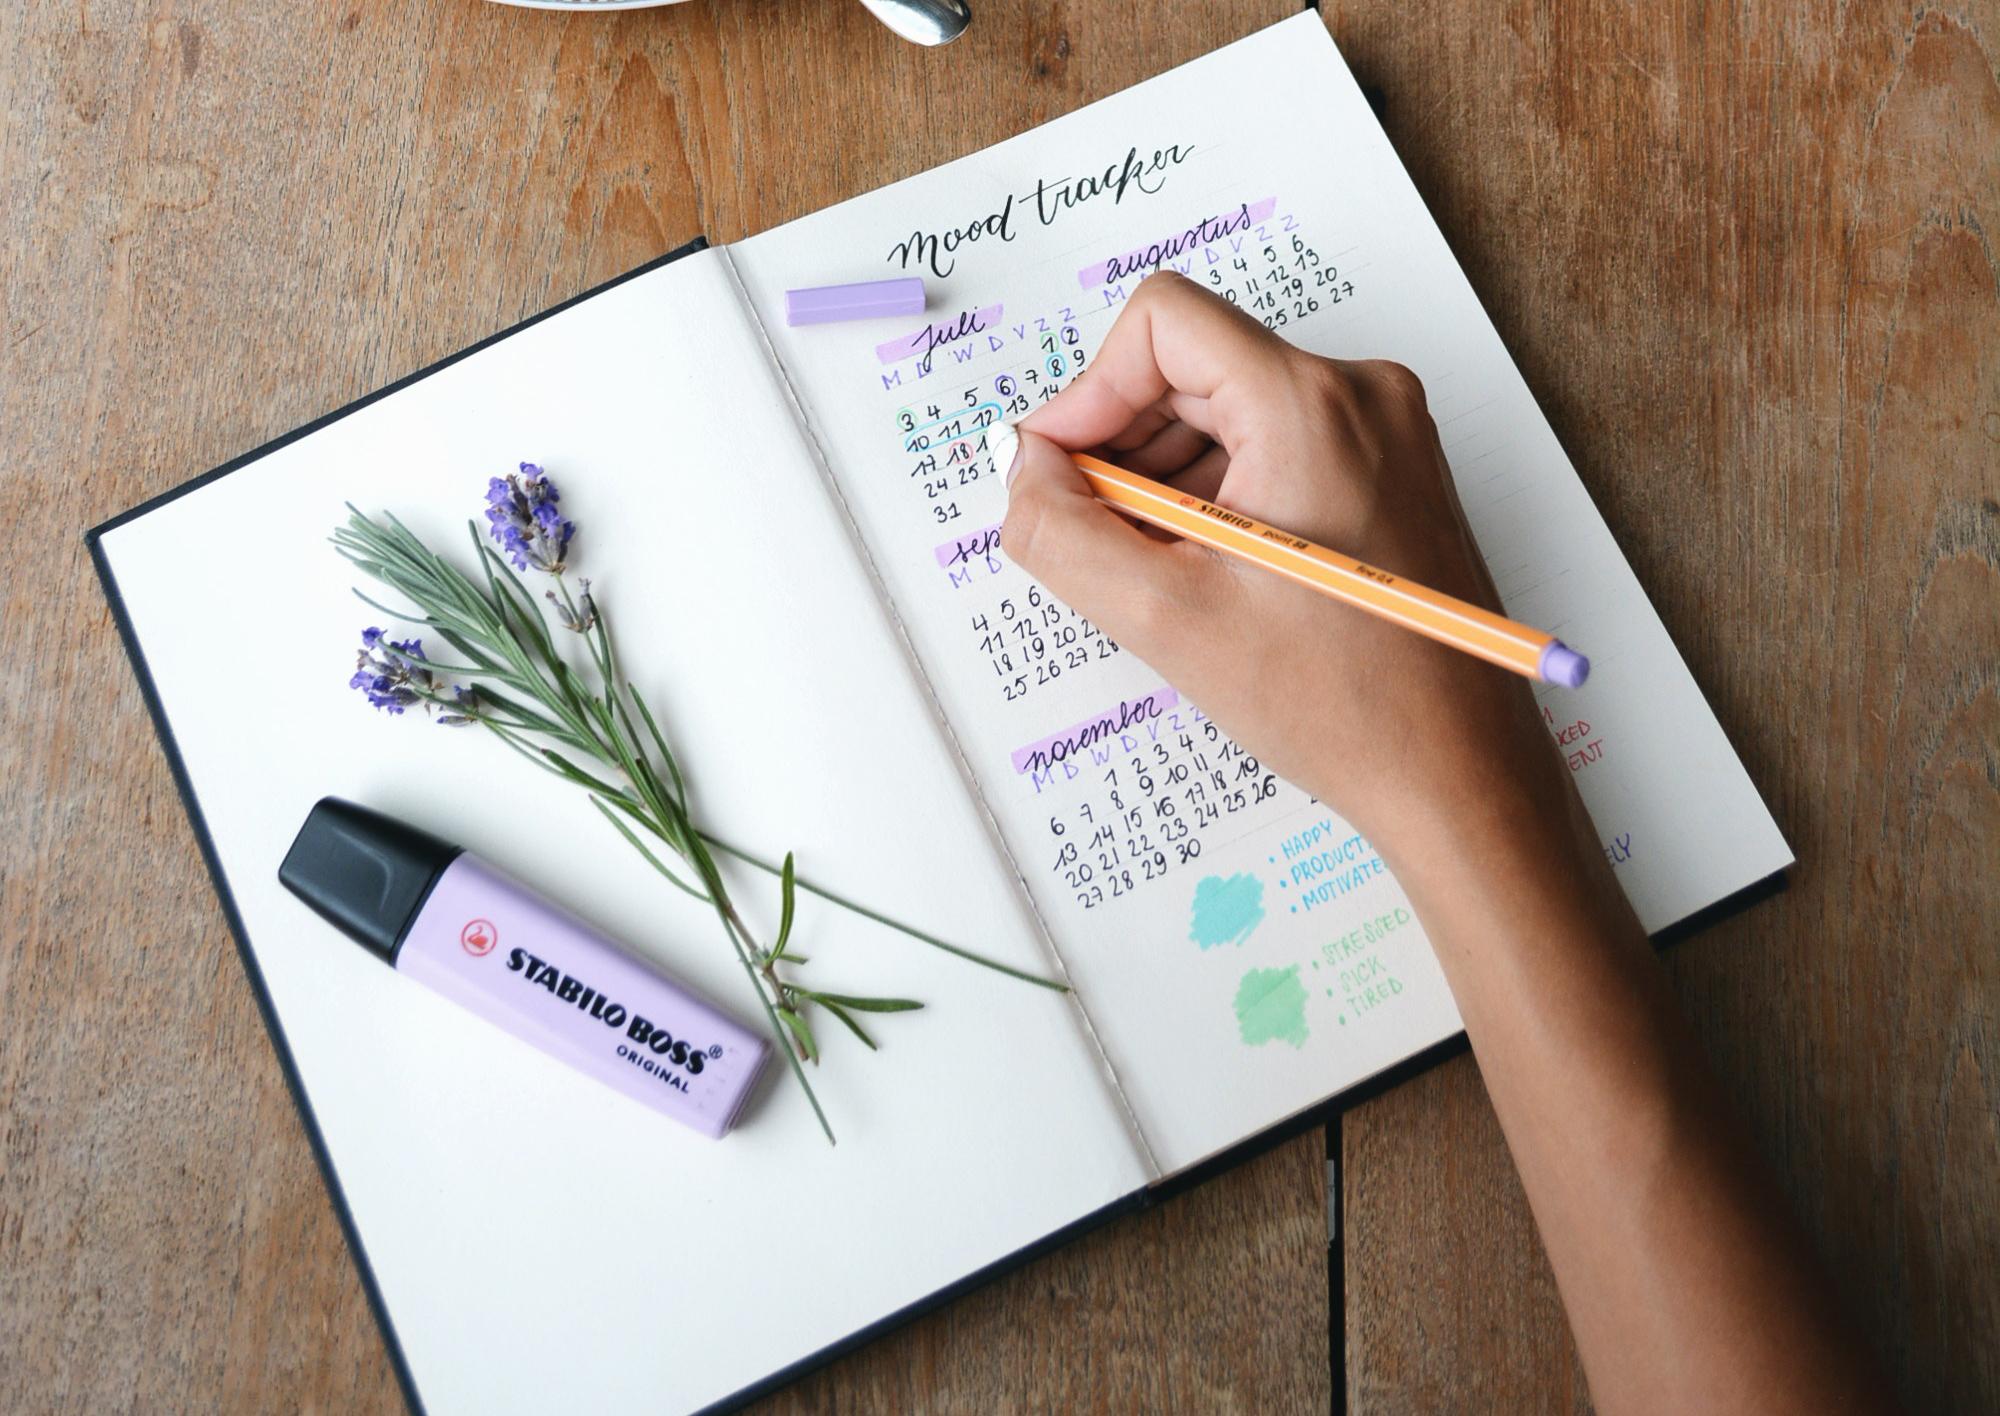 Inspirational bullet journal ideas for a new month | The Independent ...